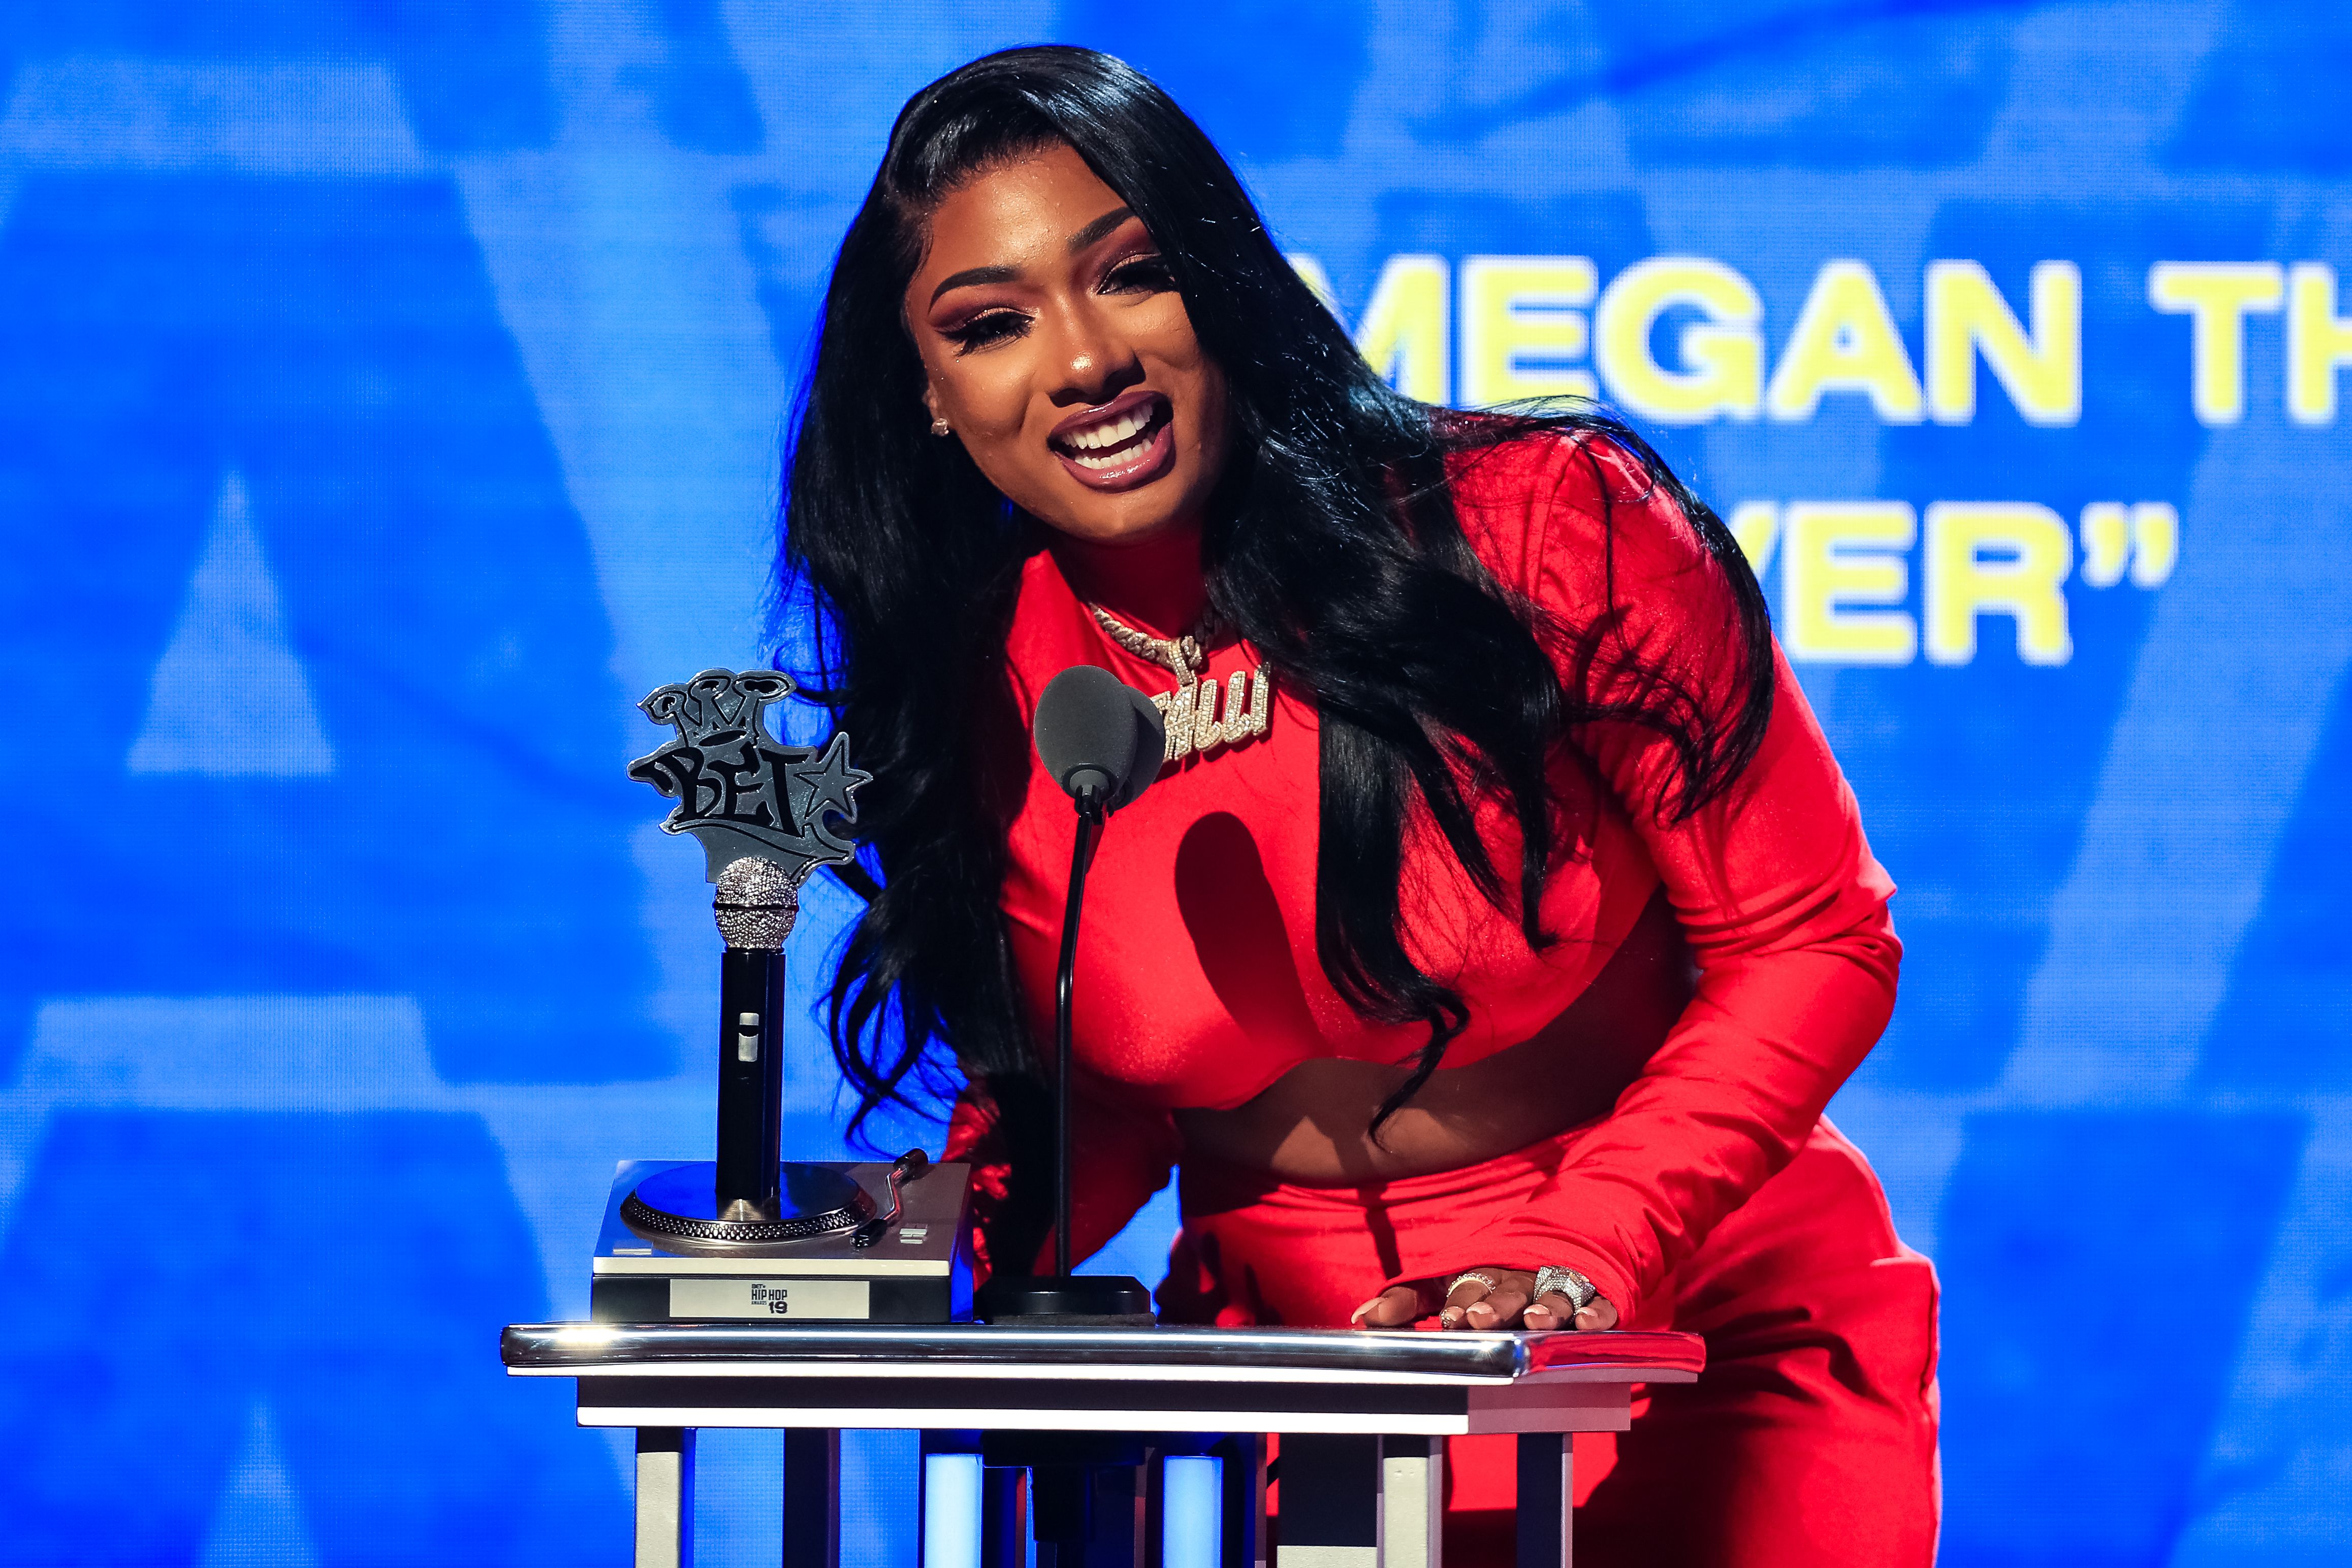 Rapper Megan Thee Stallion talking on stage at the BET Hip Hop Awards 2019 on October 5, 2019. | Photo: Getty Images